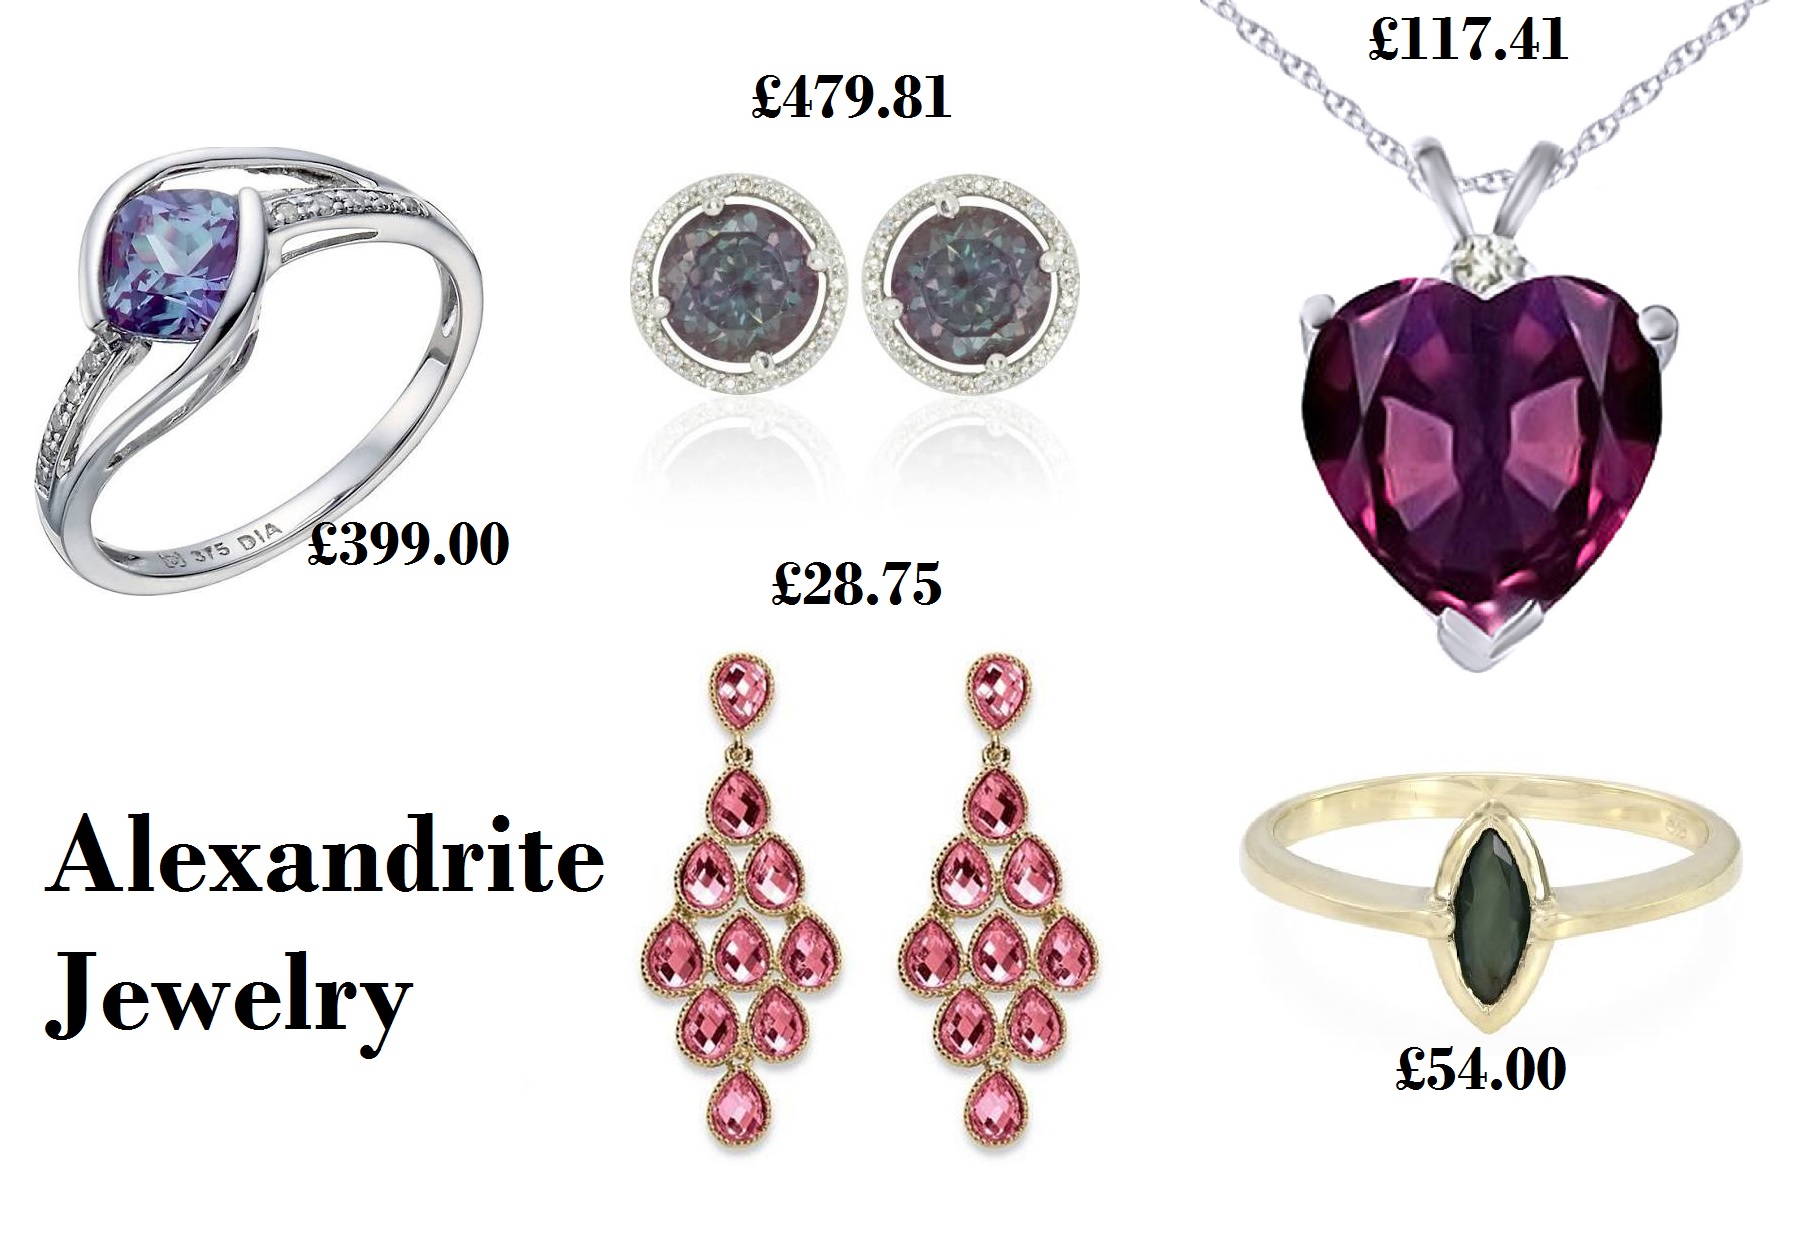 Alexandrite and Pearl - The Best June Birthstone Jewelry